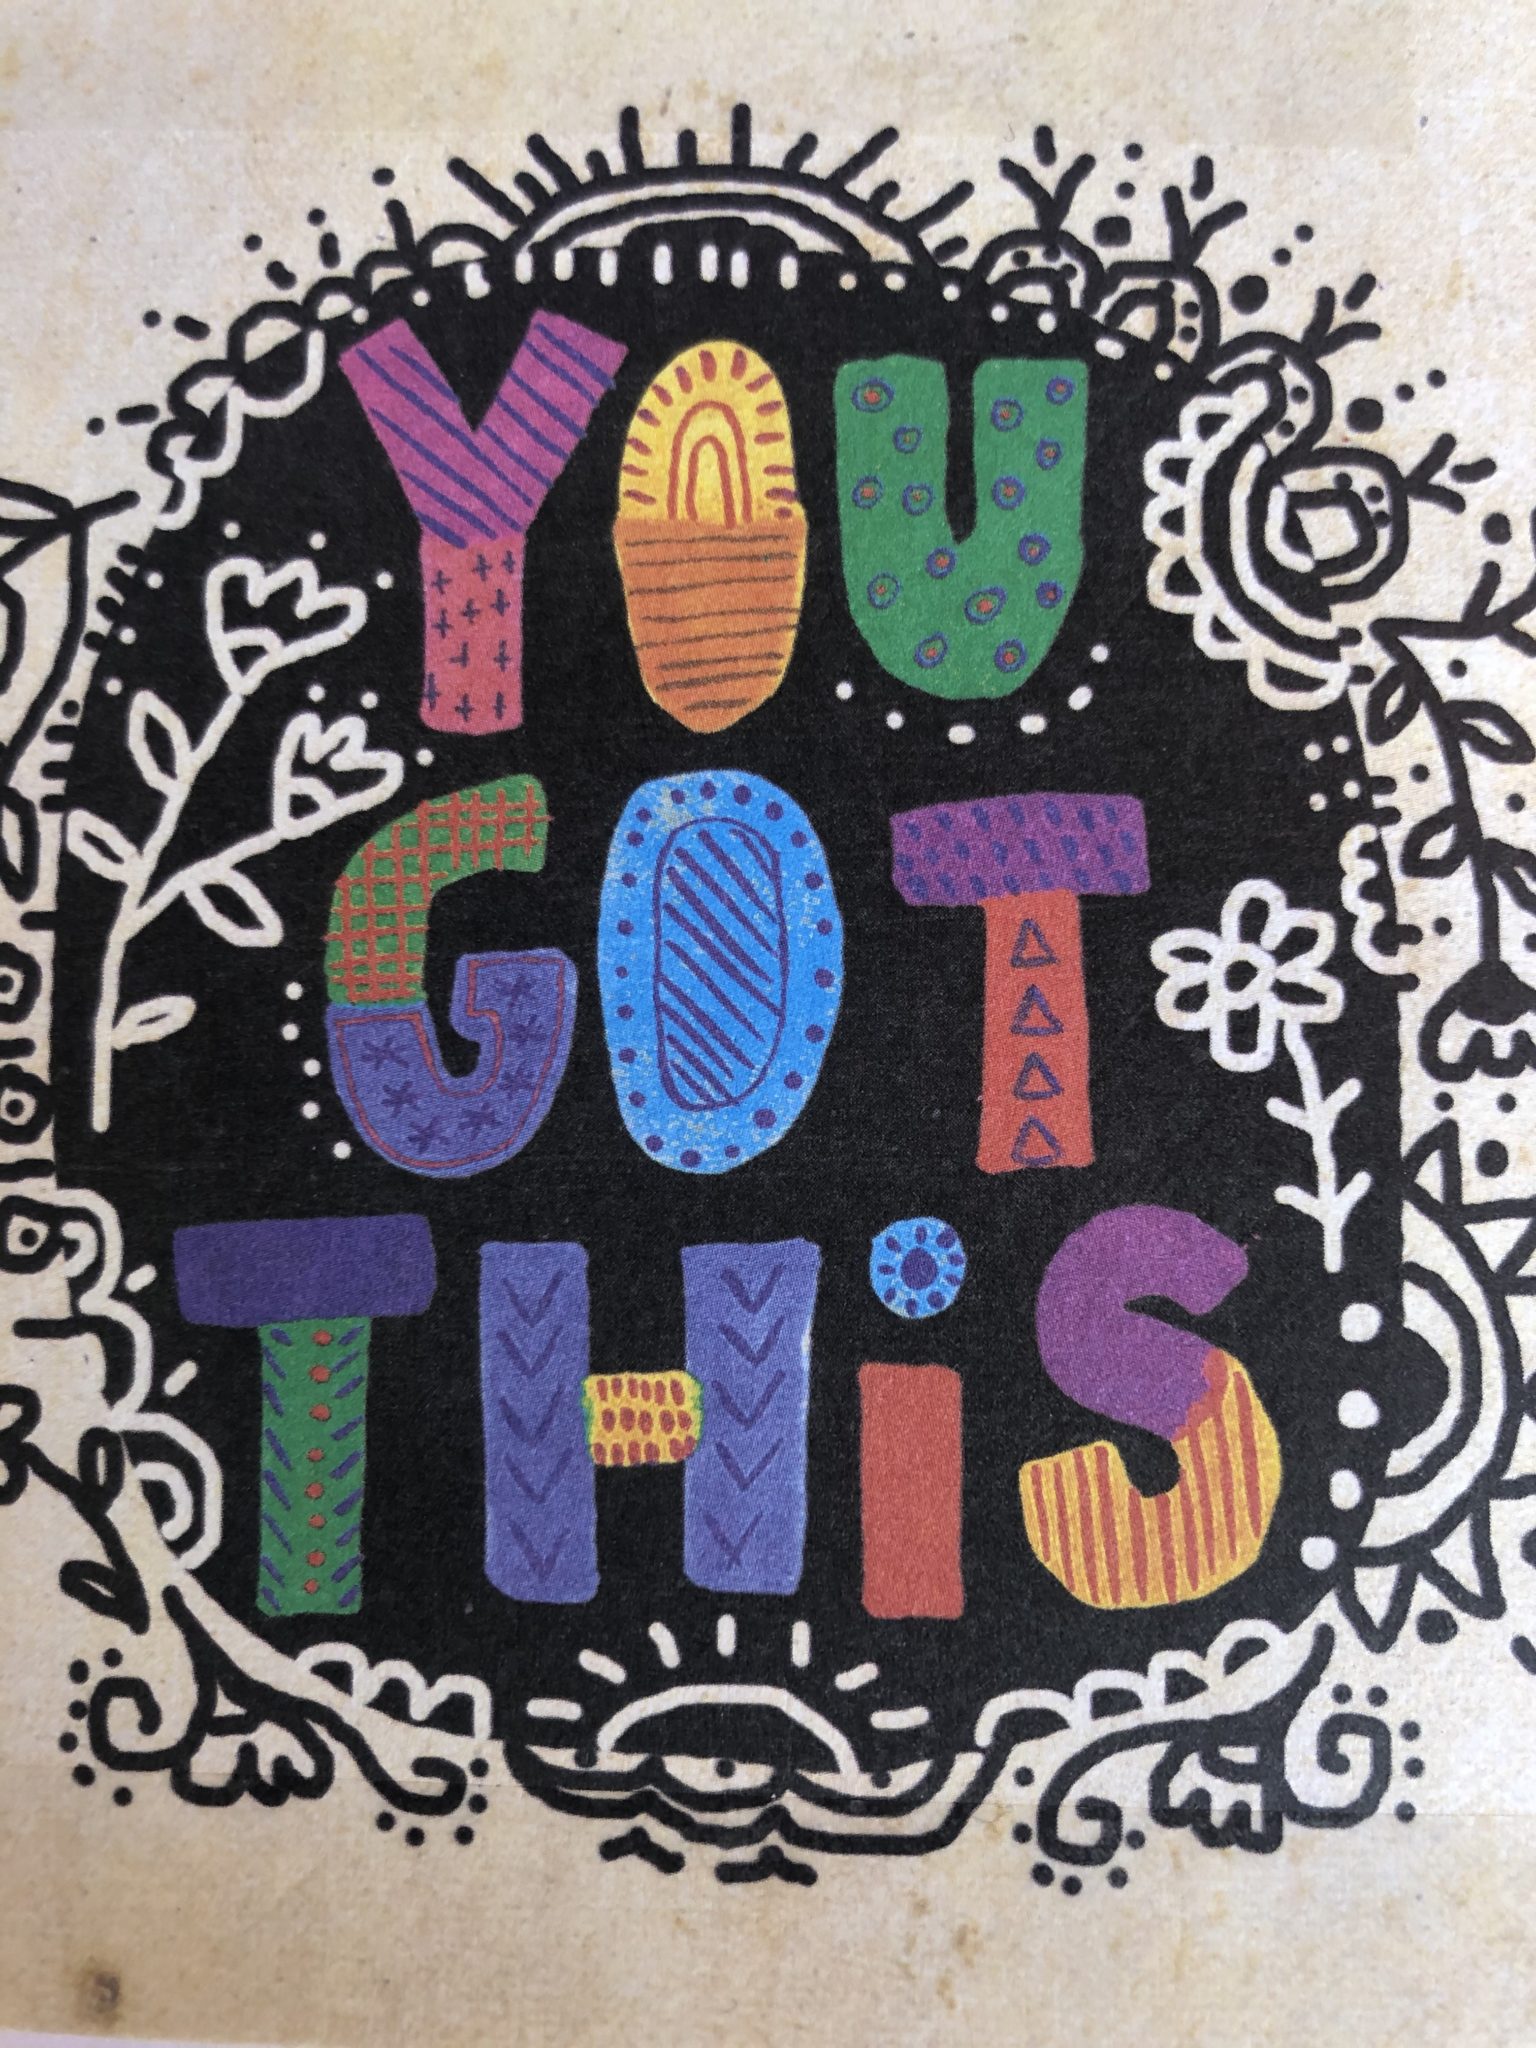 Image "You Got This" for my blog My Family's Self-Nurturing Challenge